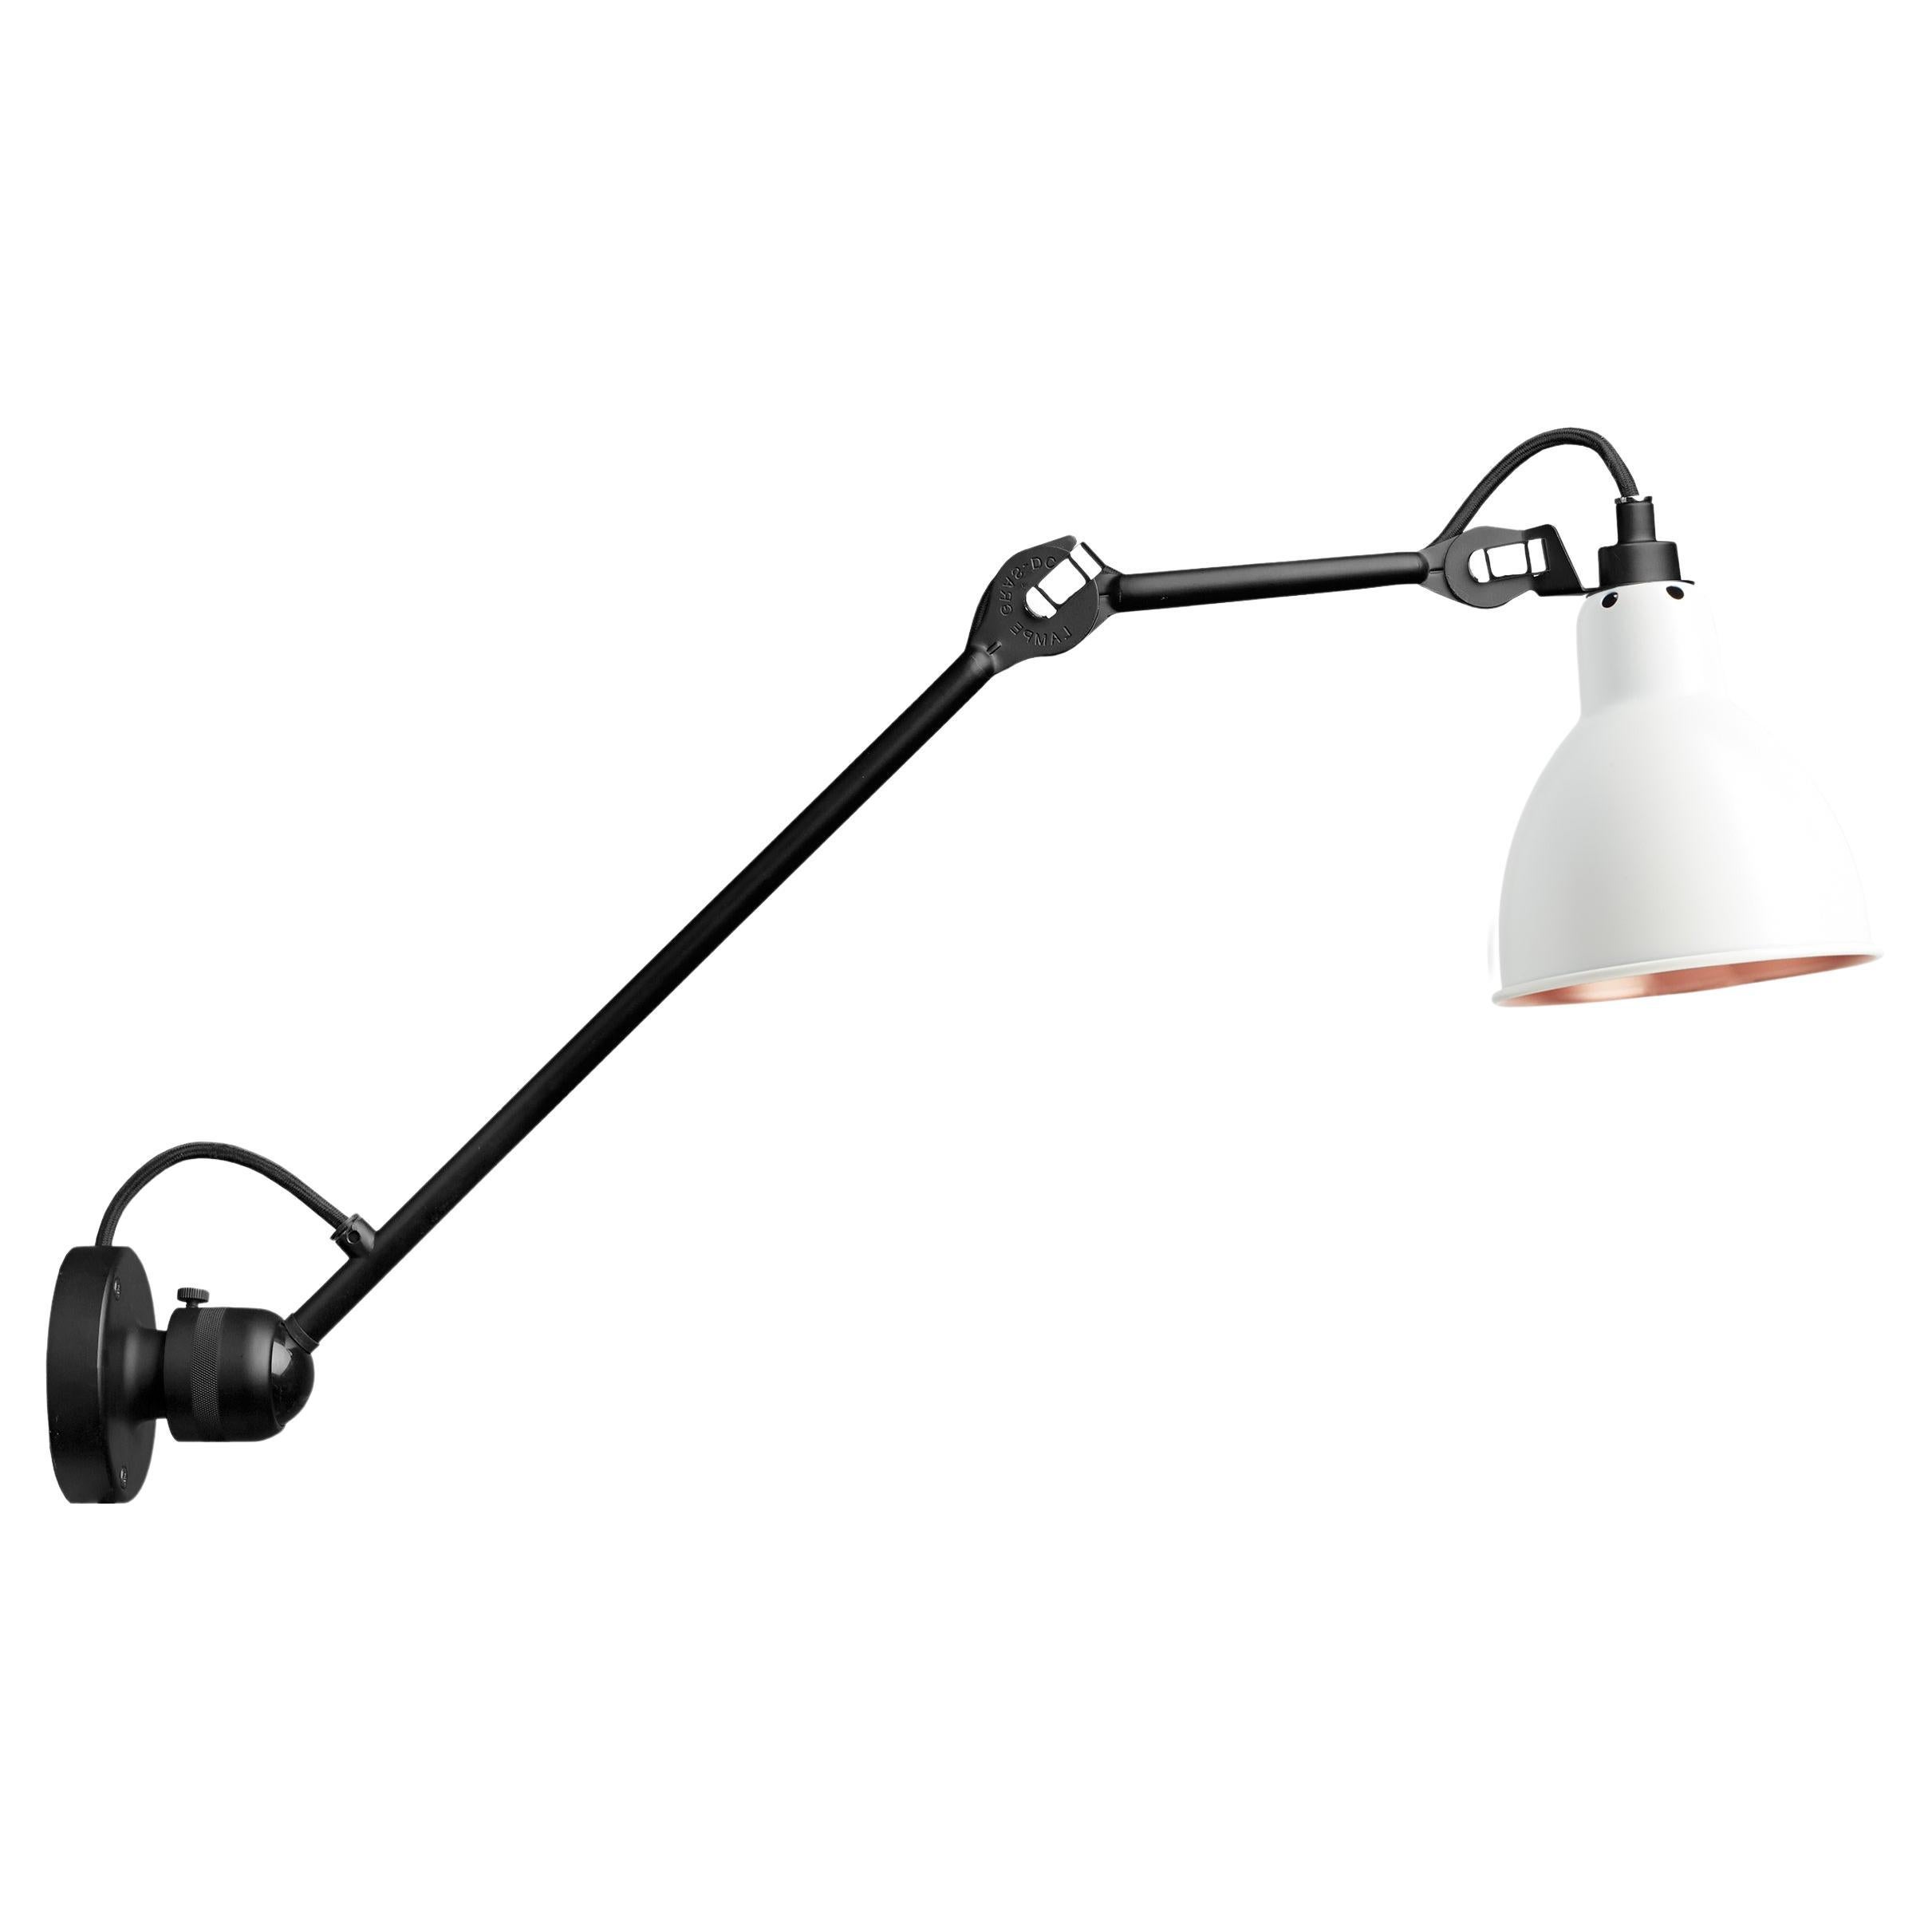 DCW Editions La Lampe Gras N°304 L40 Wall Lamp in Black Arm & White Copper Shade For Sale